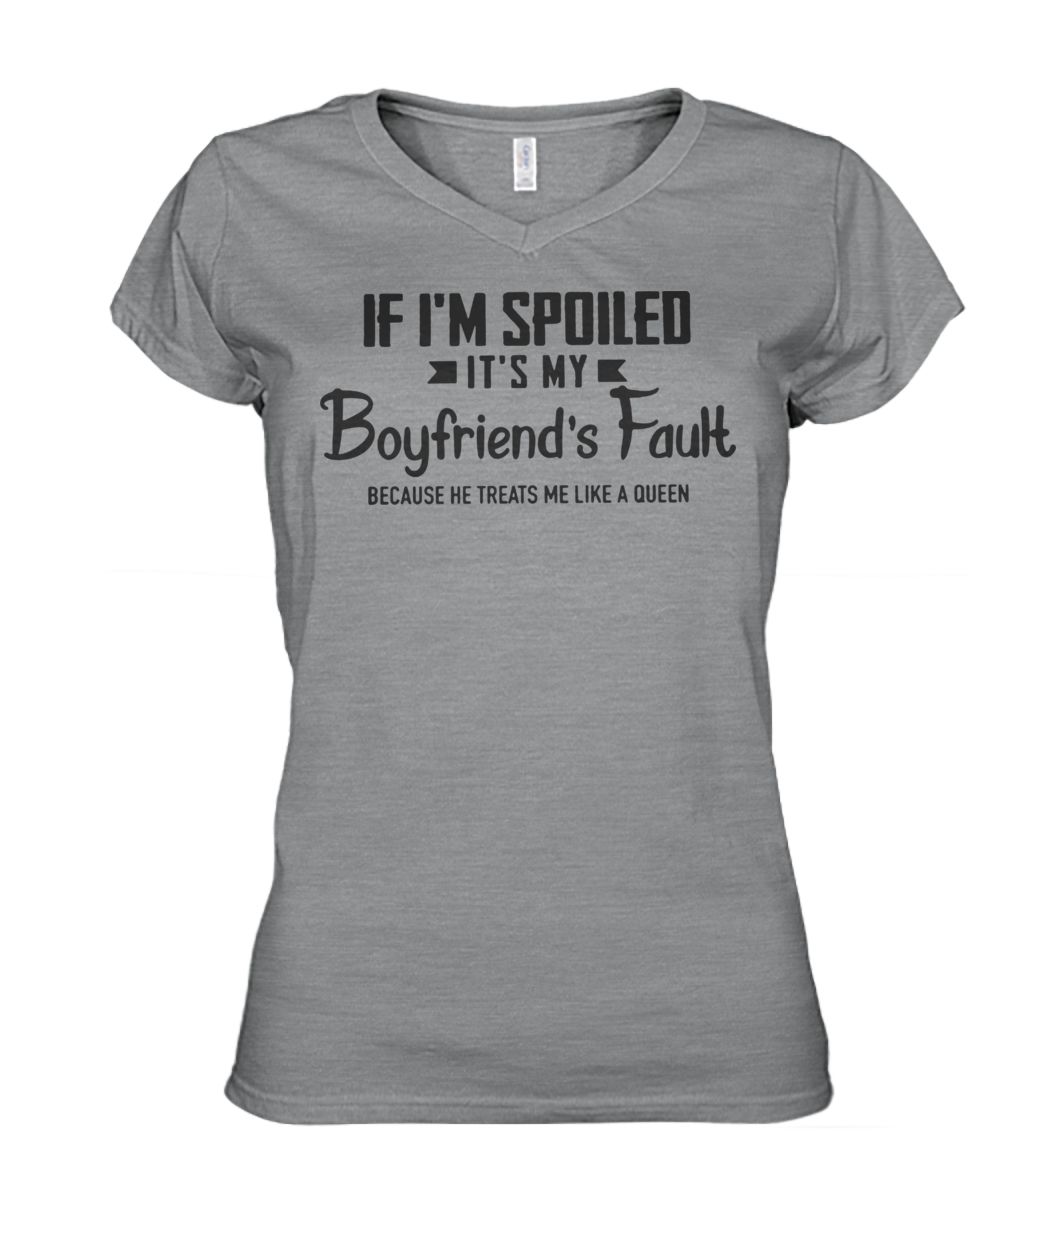 If I'm spoiled it's my boyfriend's fault because he treats me like a queen women's v-neck